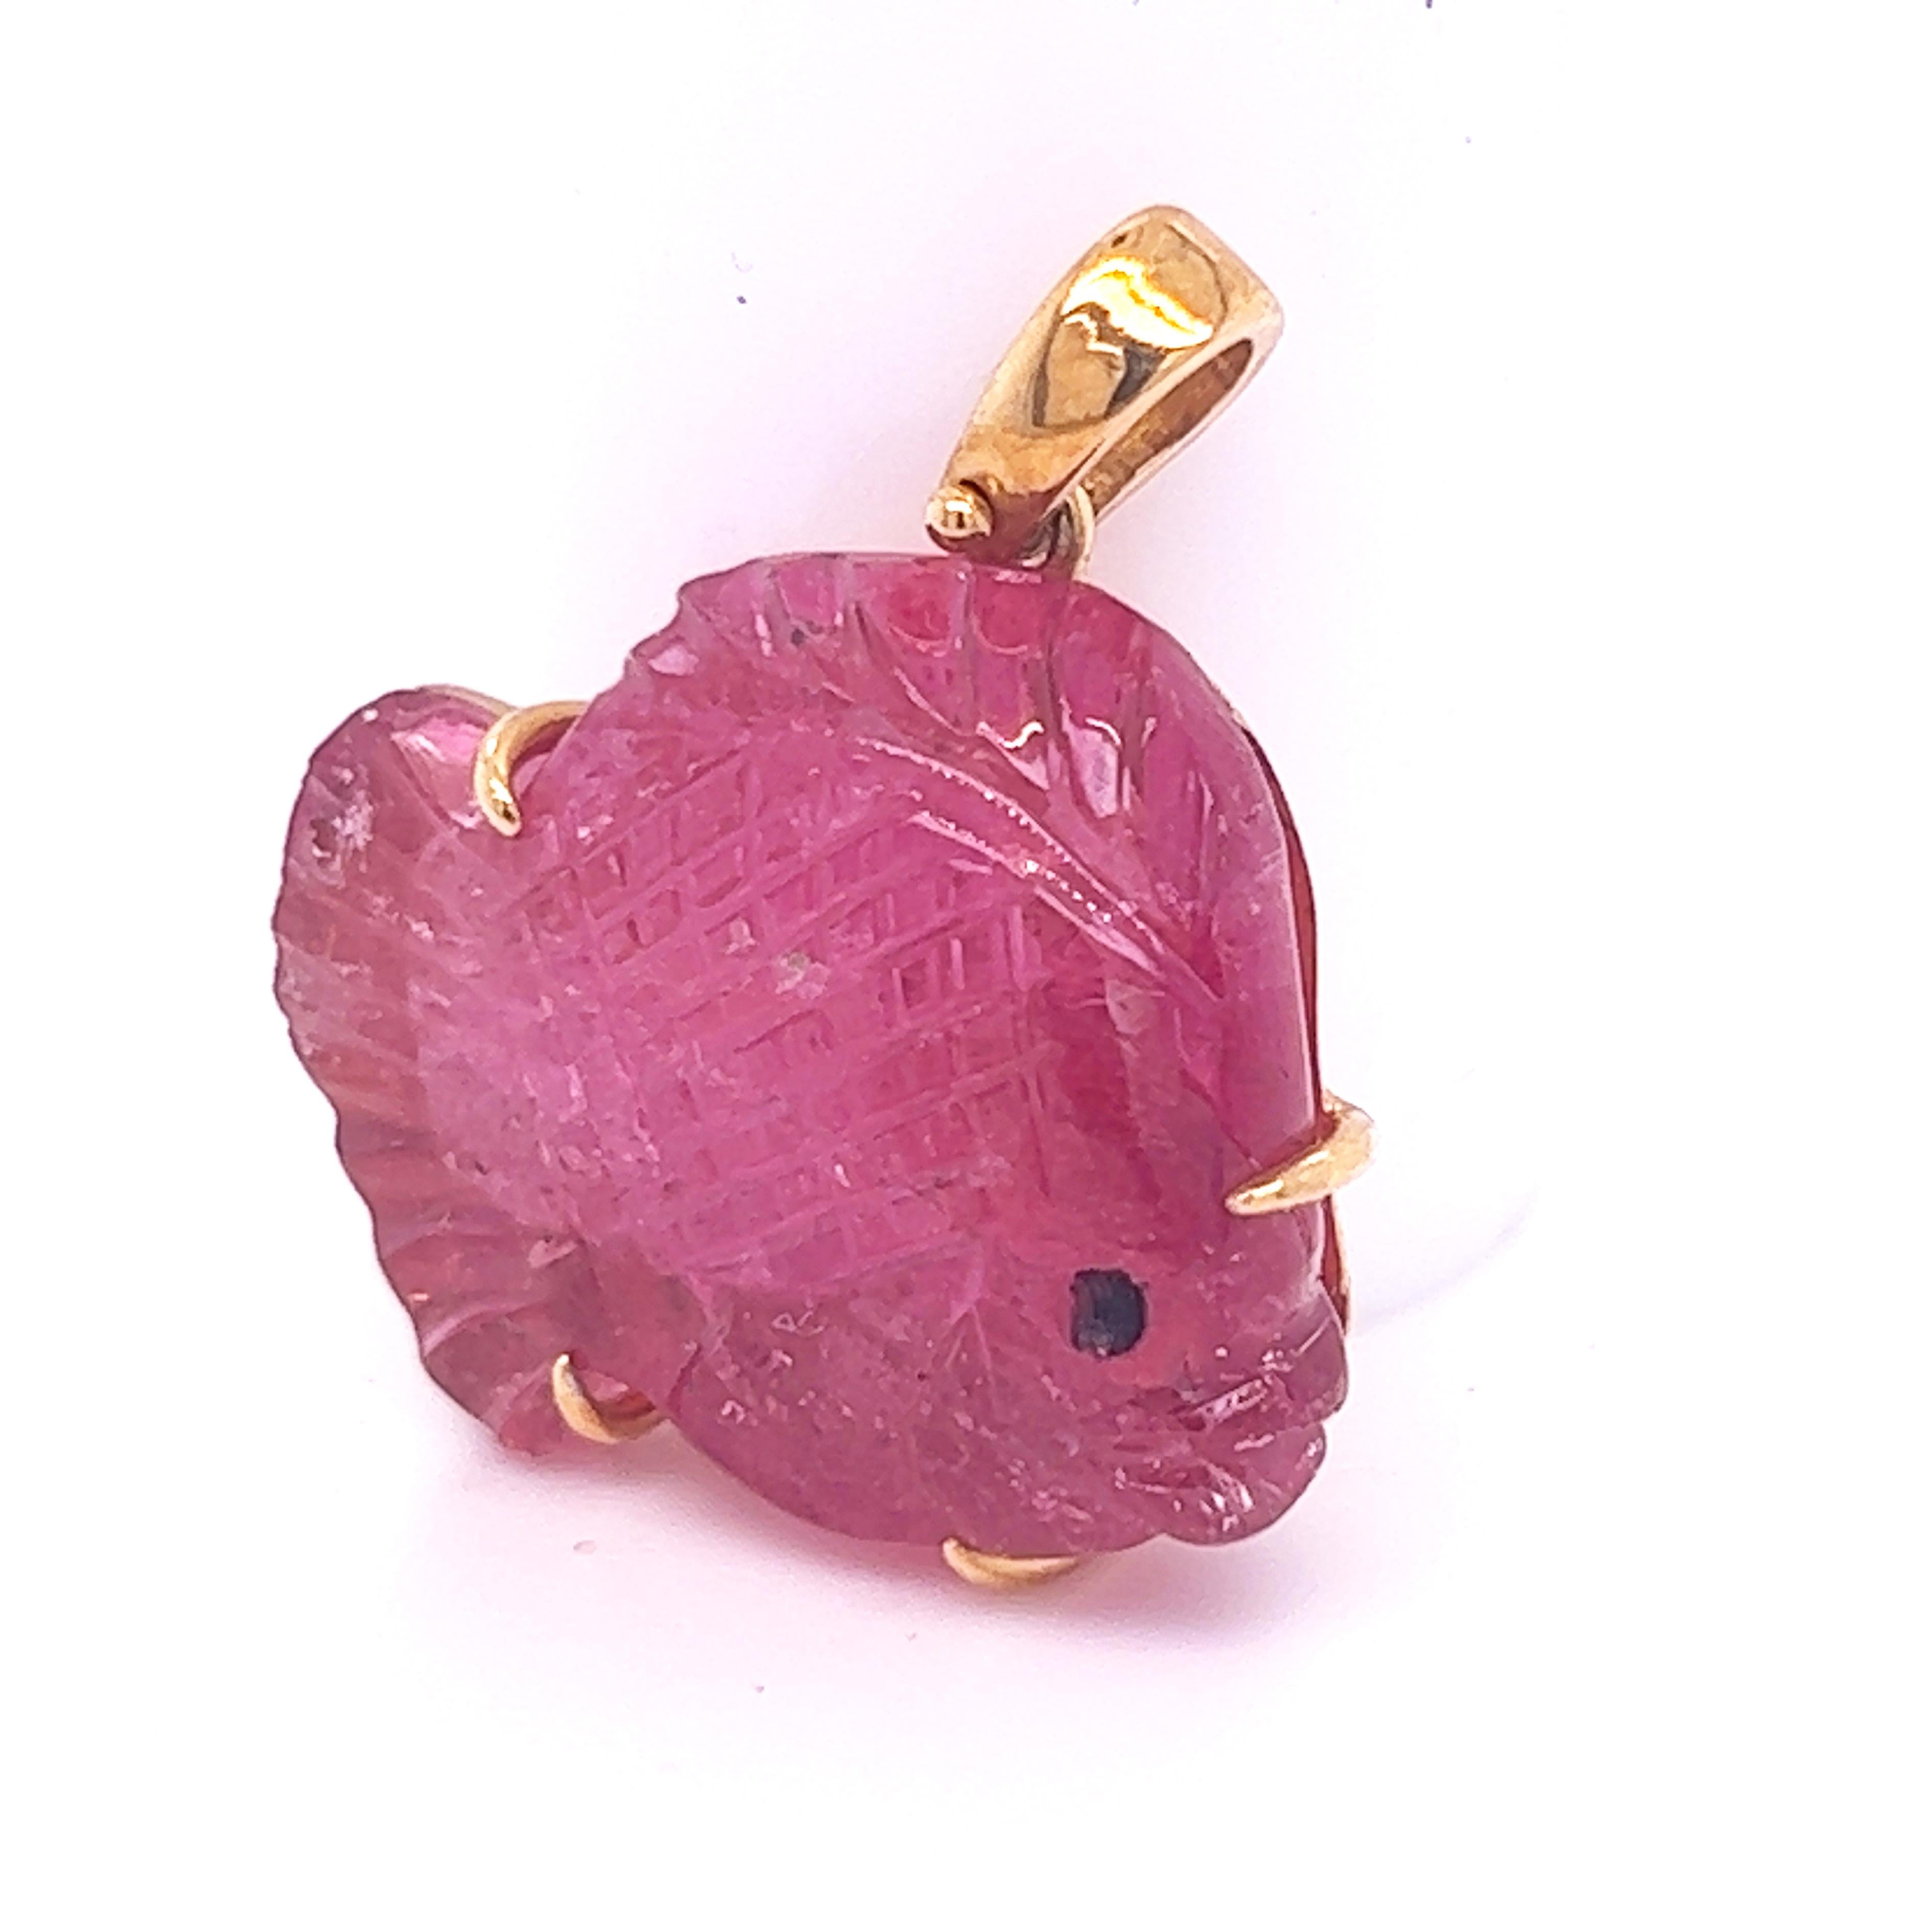 One-of-a-kind, chic pendant featuring an unique 12Kt pink tourmaline, beautifully fish shaped.
The natural stone, hand inlaid and hand engraved in Germany was carefully set in 18k yellow gold in our atelier. A long dark leather ribbon is